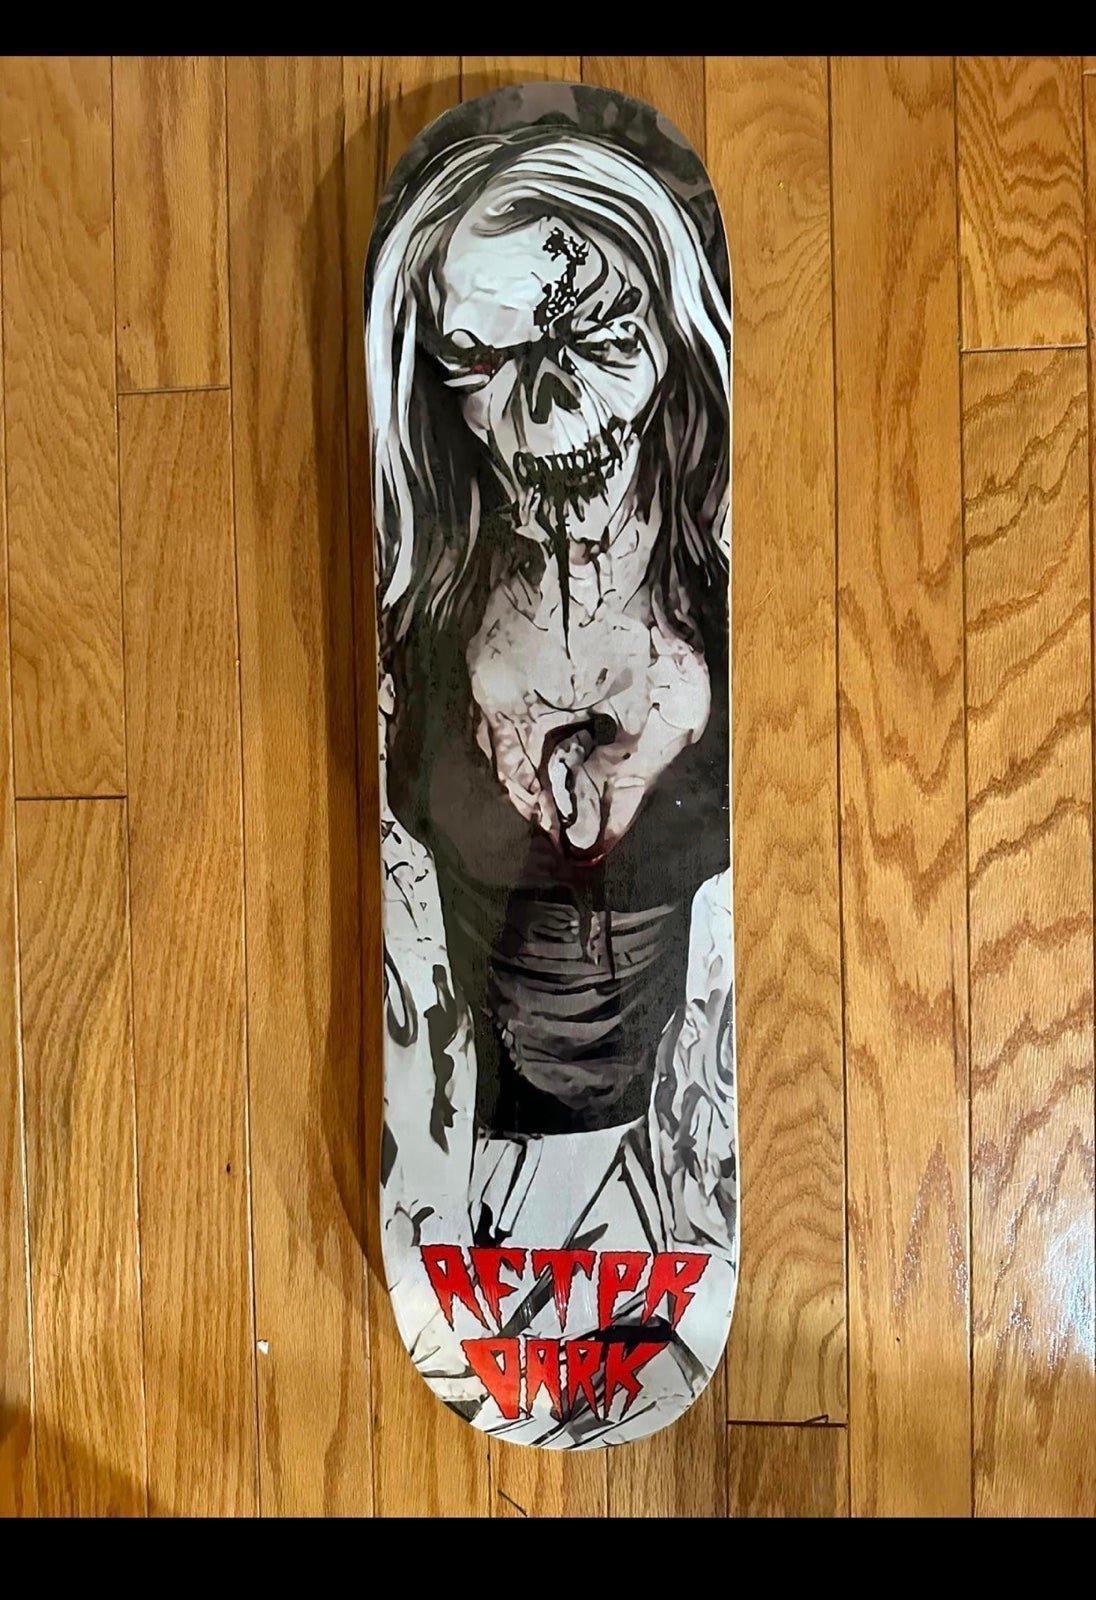 After Dark brand new skate deck with black grip UPDATED shipping 6$less 86cSZjyb1